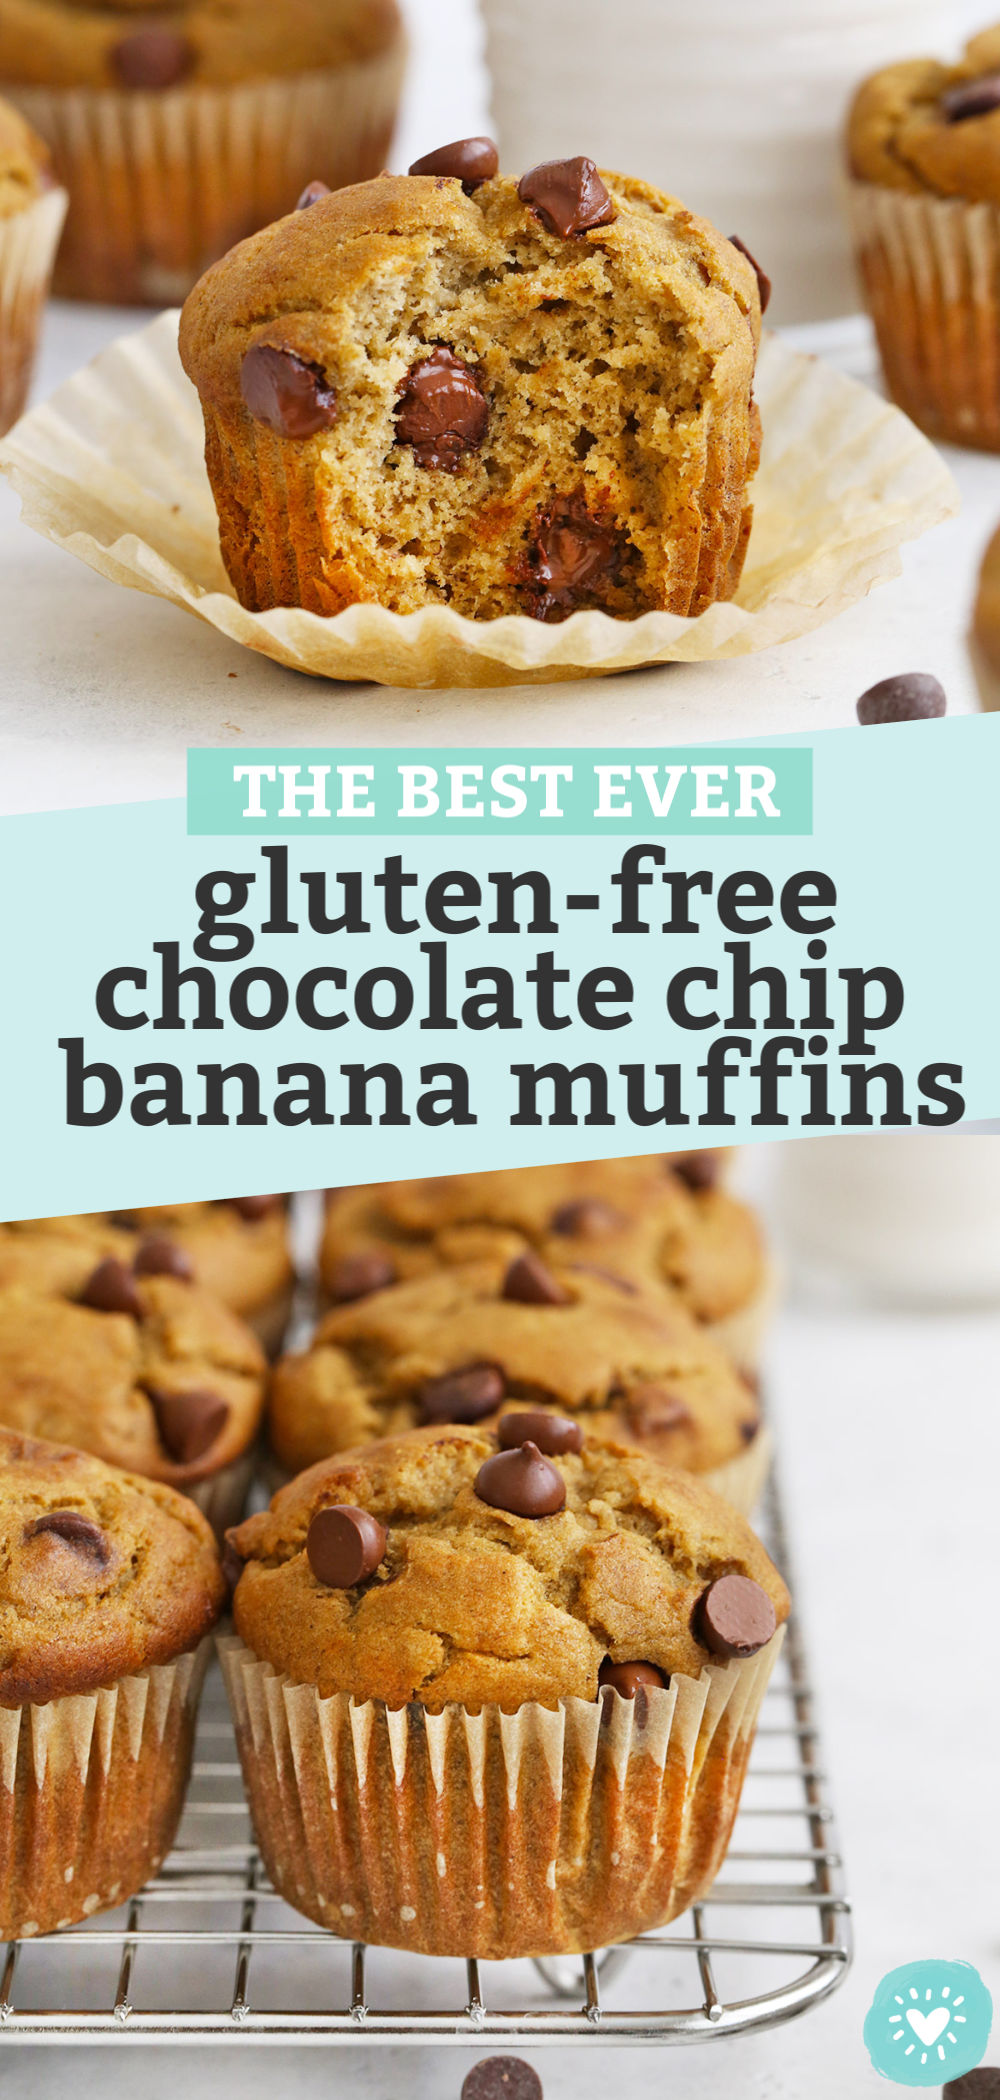 Collage of images of Gluten-Free Chocolate Chip Banana Muffins with text overlay that reads "The Best Ever Gluten-Free Chocolate Chip Banana Muffins"